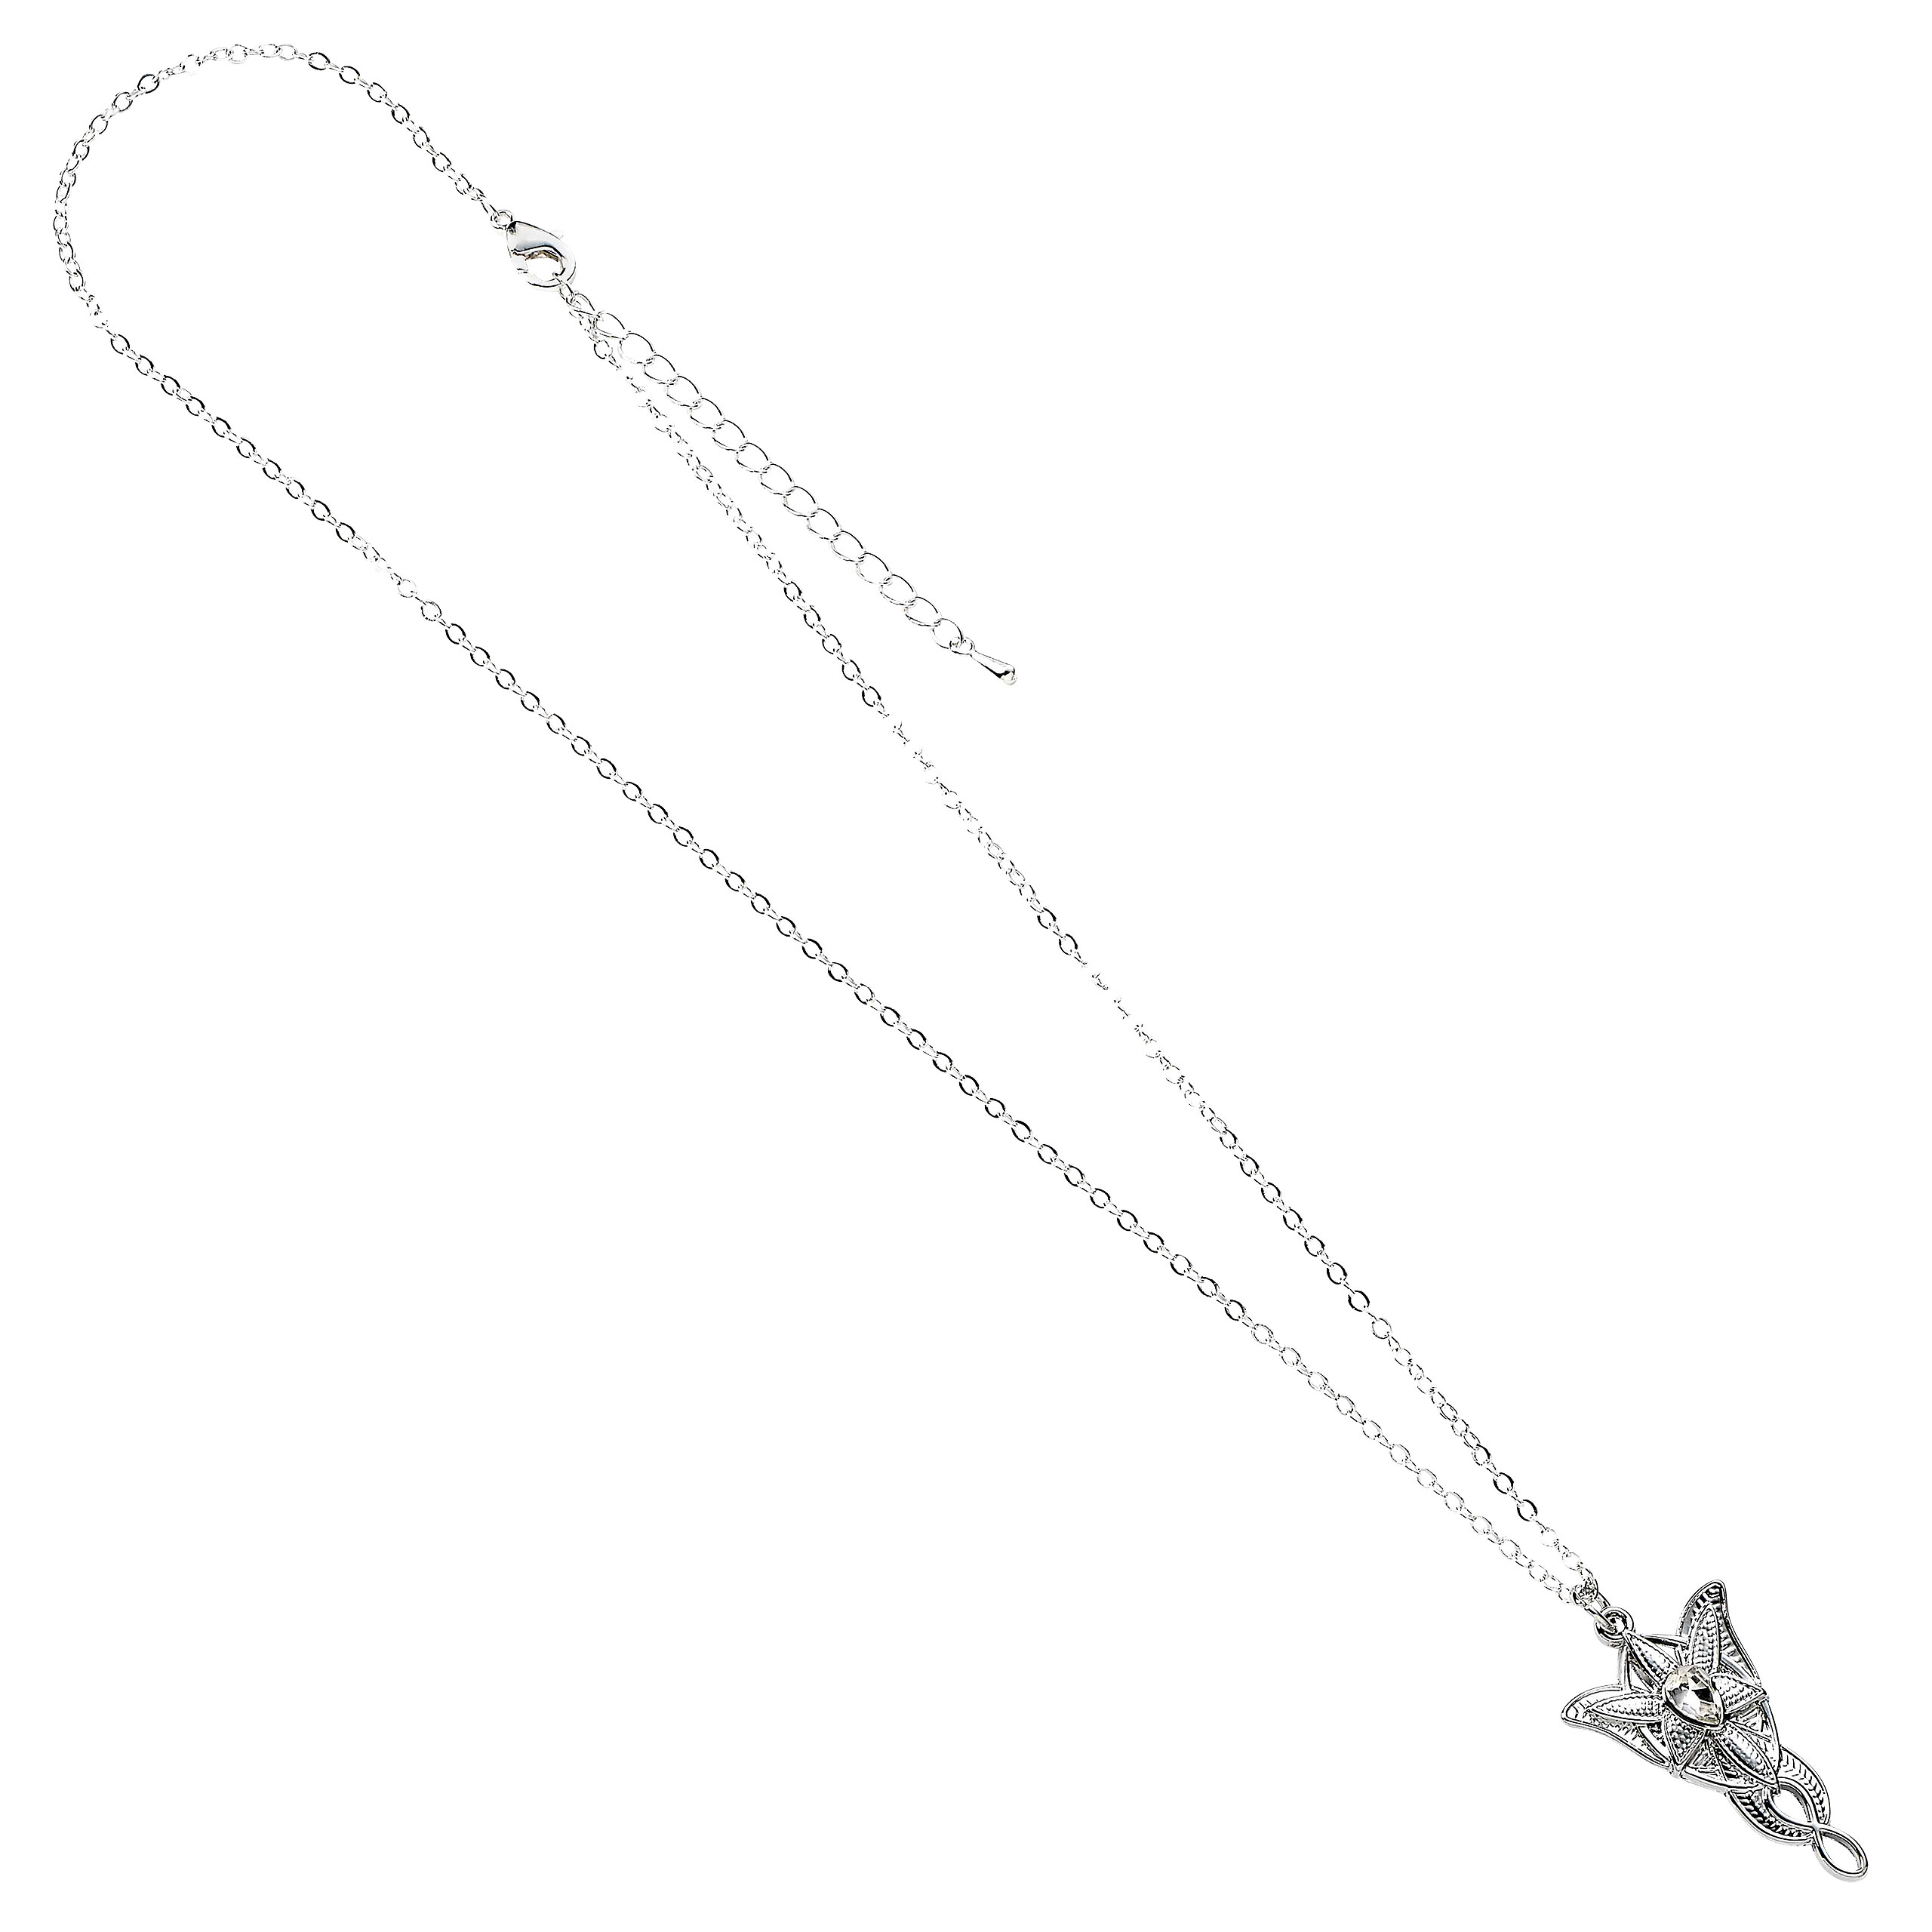 Arwen Evenstar Necklace - Lord of the Rings